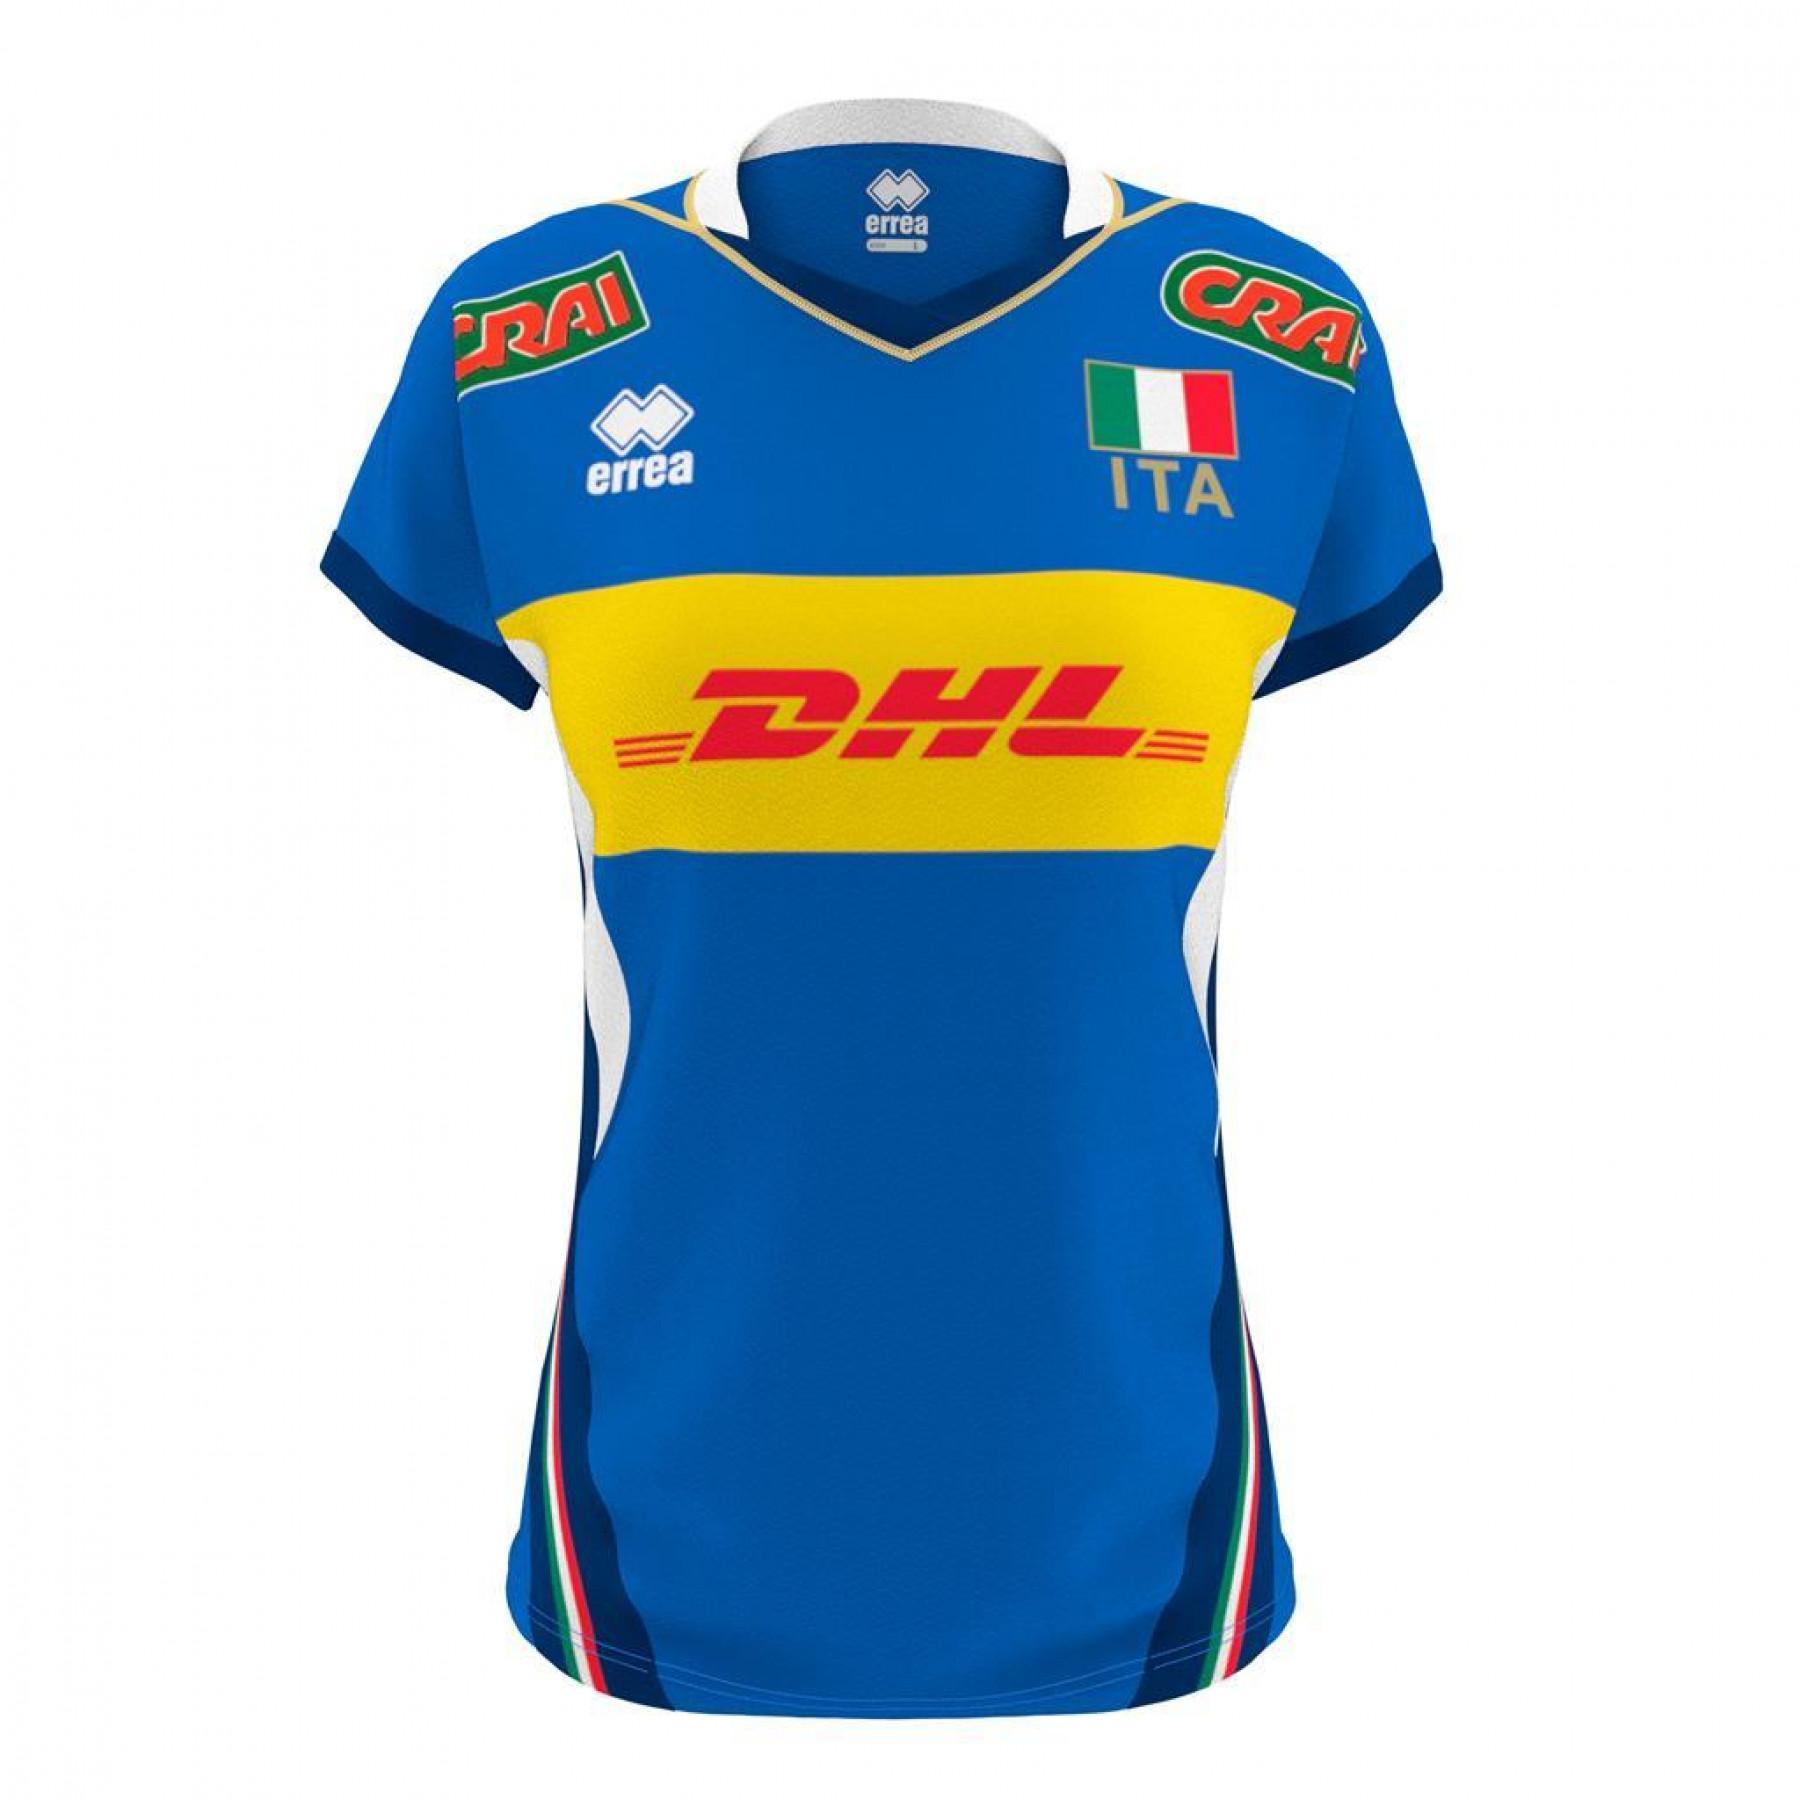 Maillot femme replica Italie Volley 2018/2019